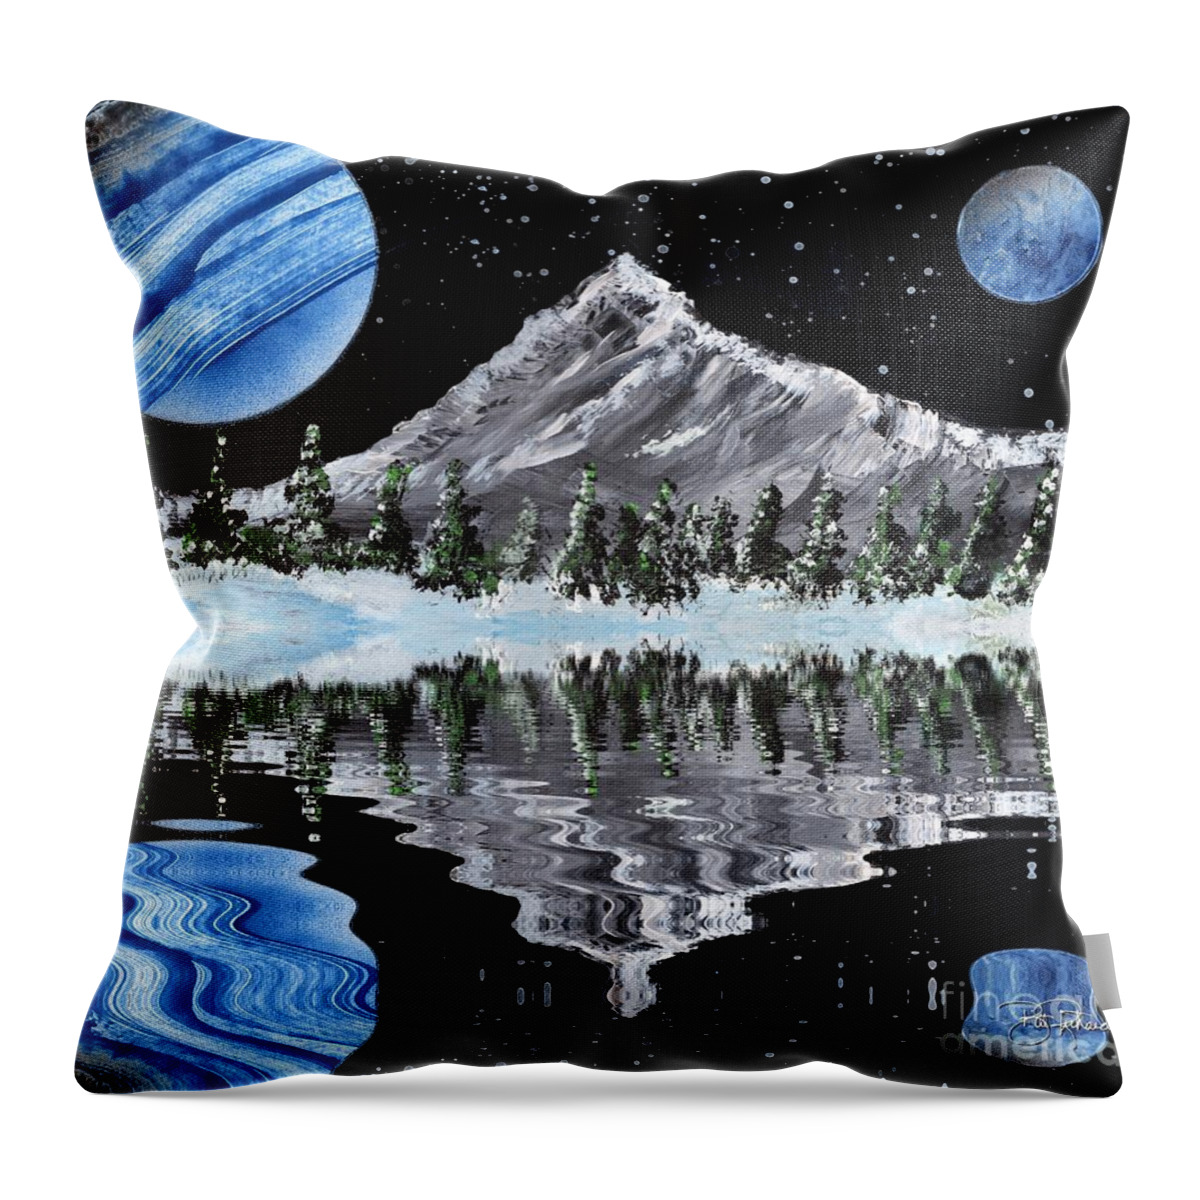 Spray Throw Pillow featuring the painting Alien landscape by Bill Richards